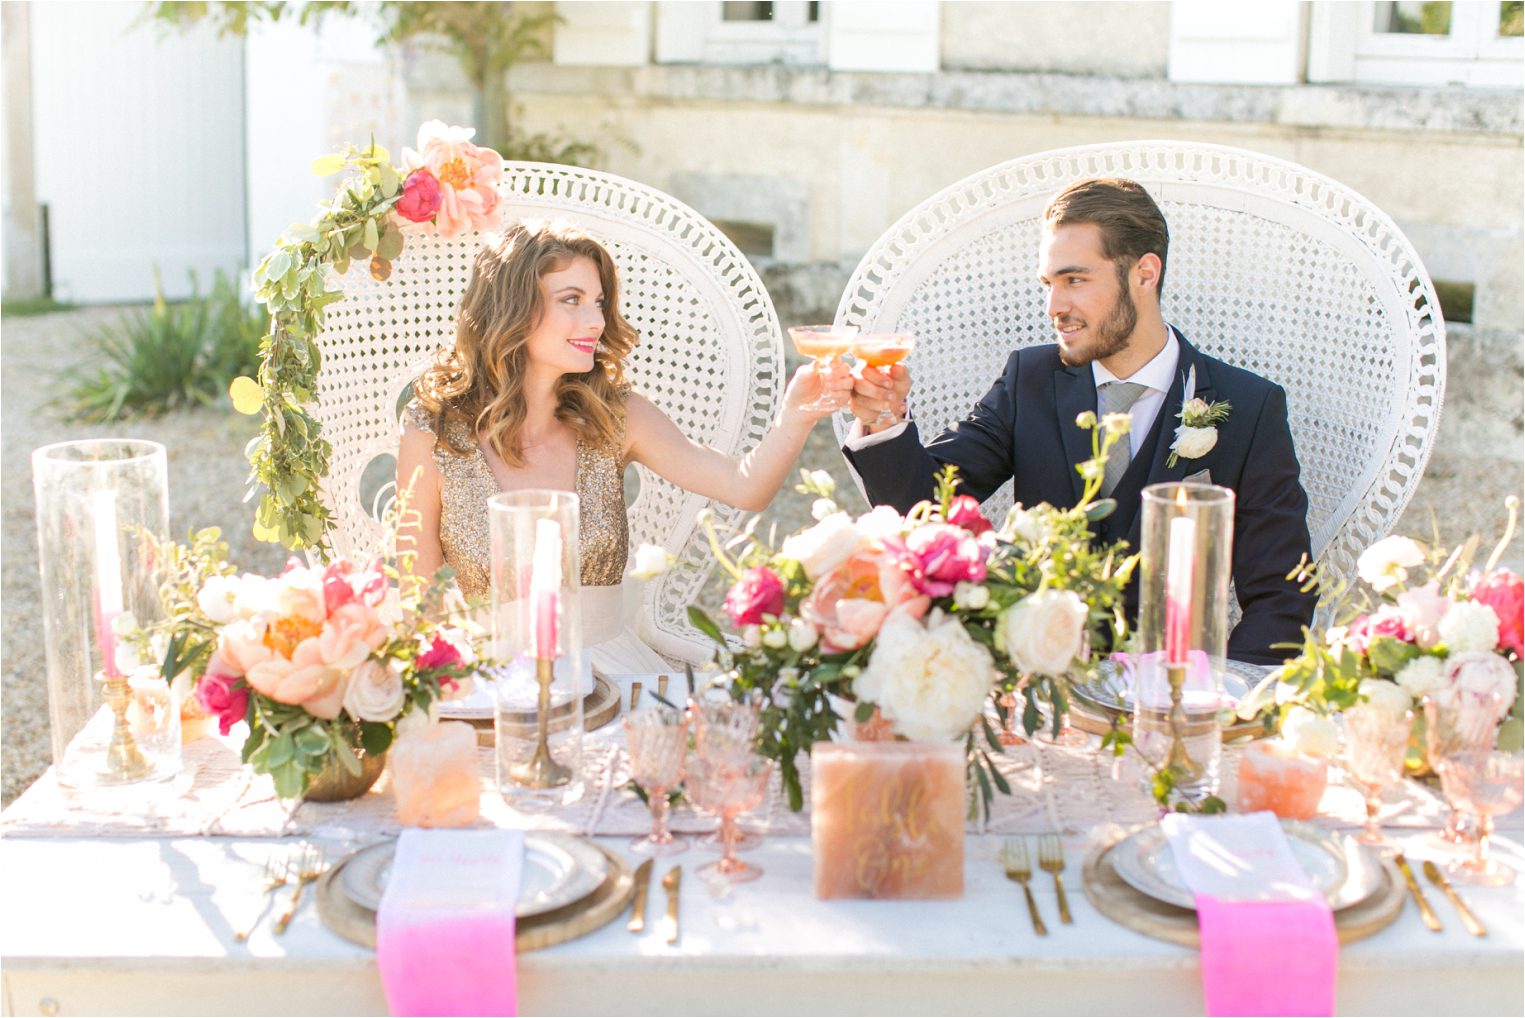 Intimate wedding dinner at a chateau in France